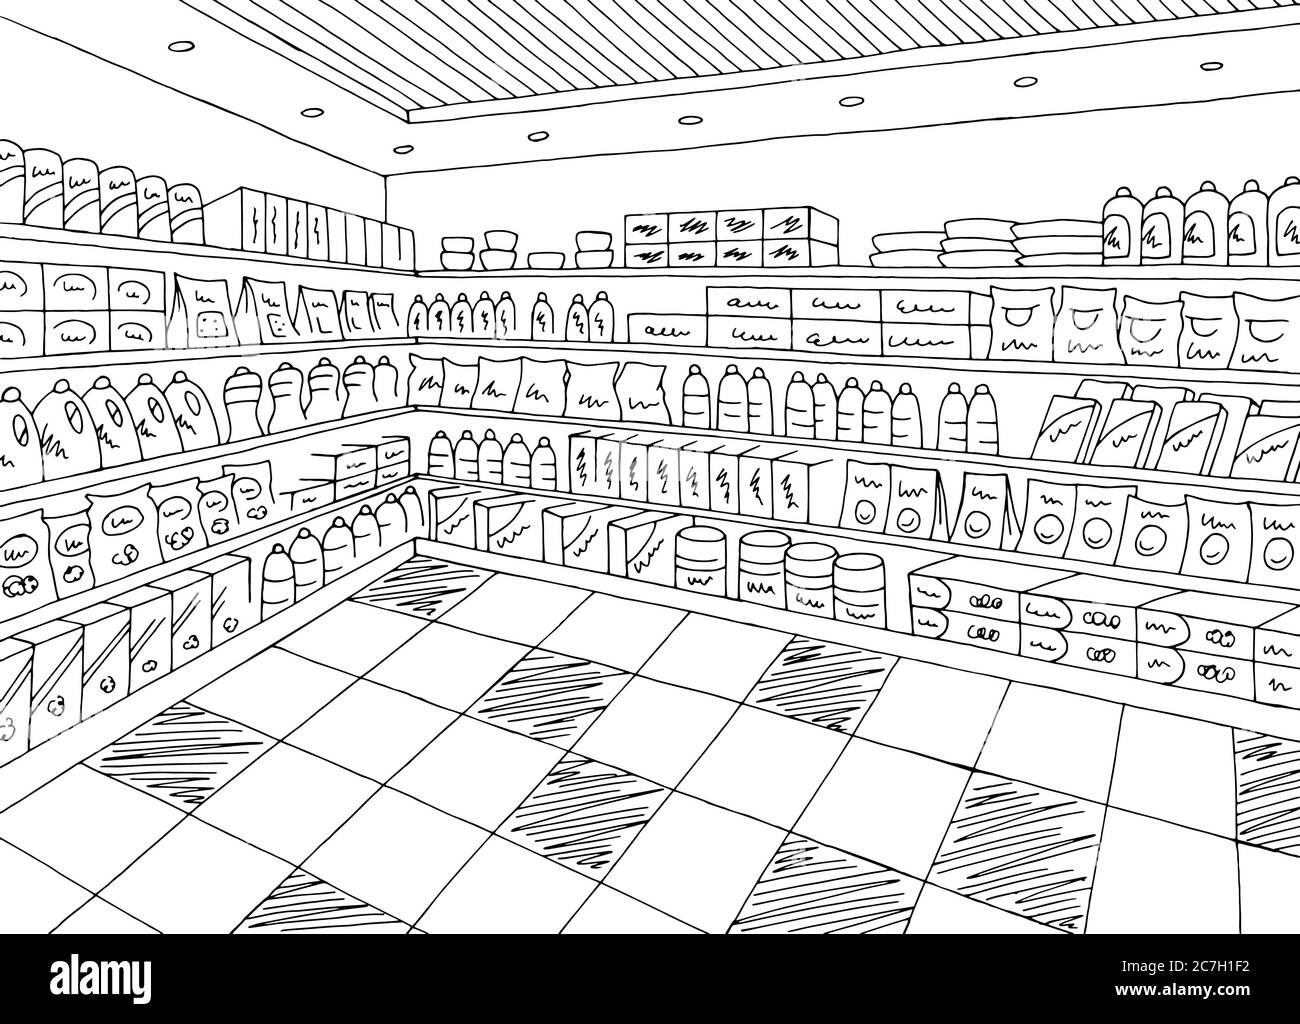 Grocery store shop interior black white graphic sketch illustration vector Stock Vector